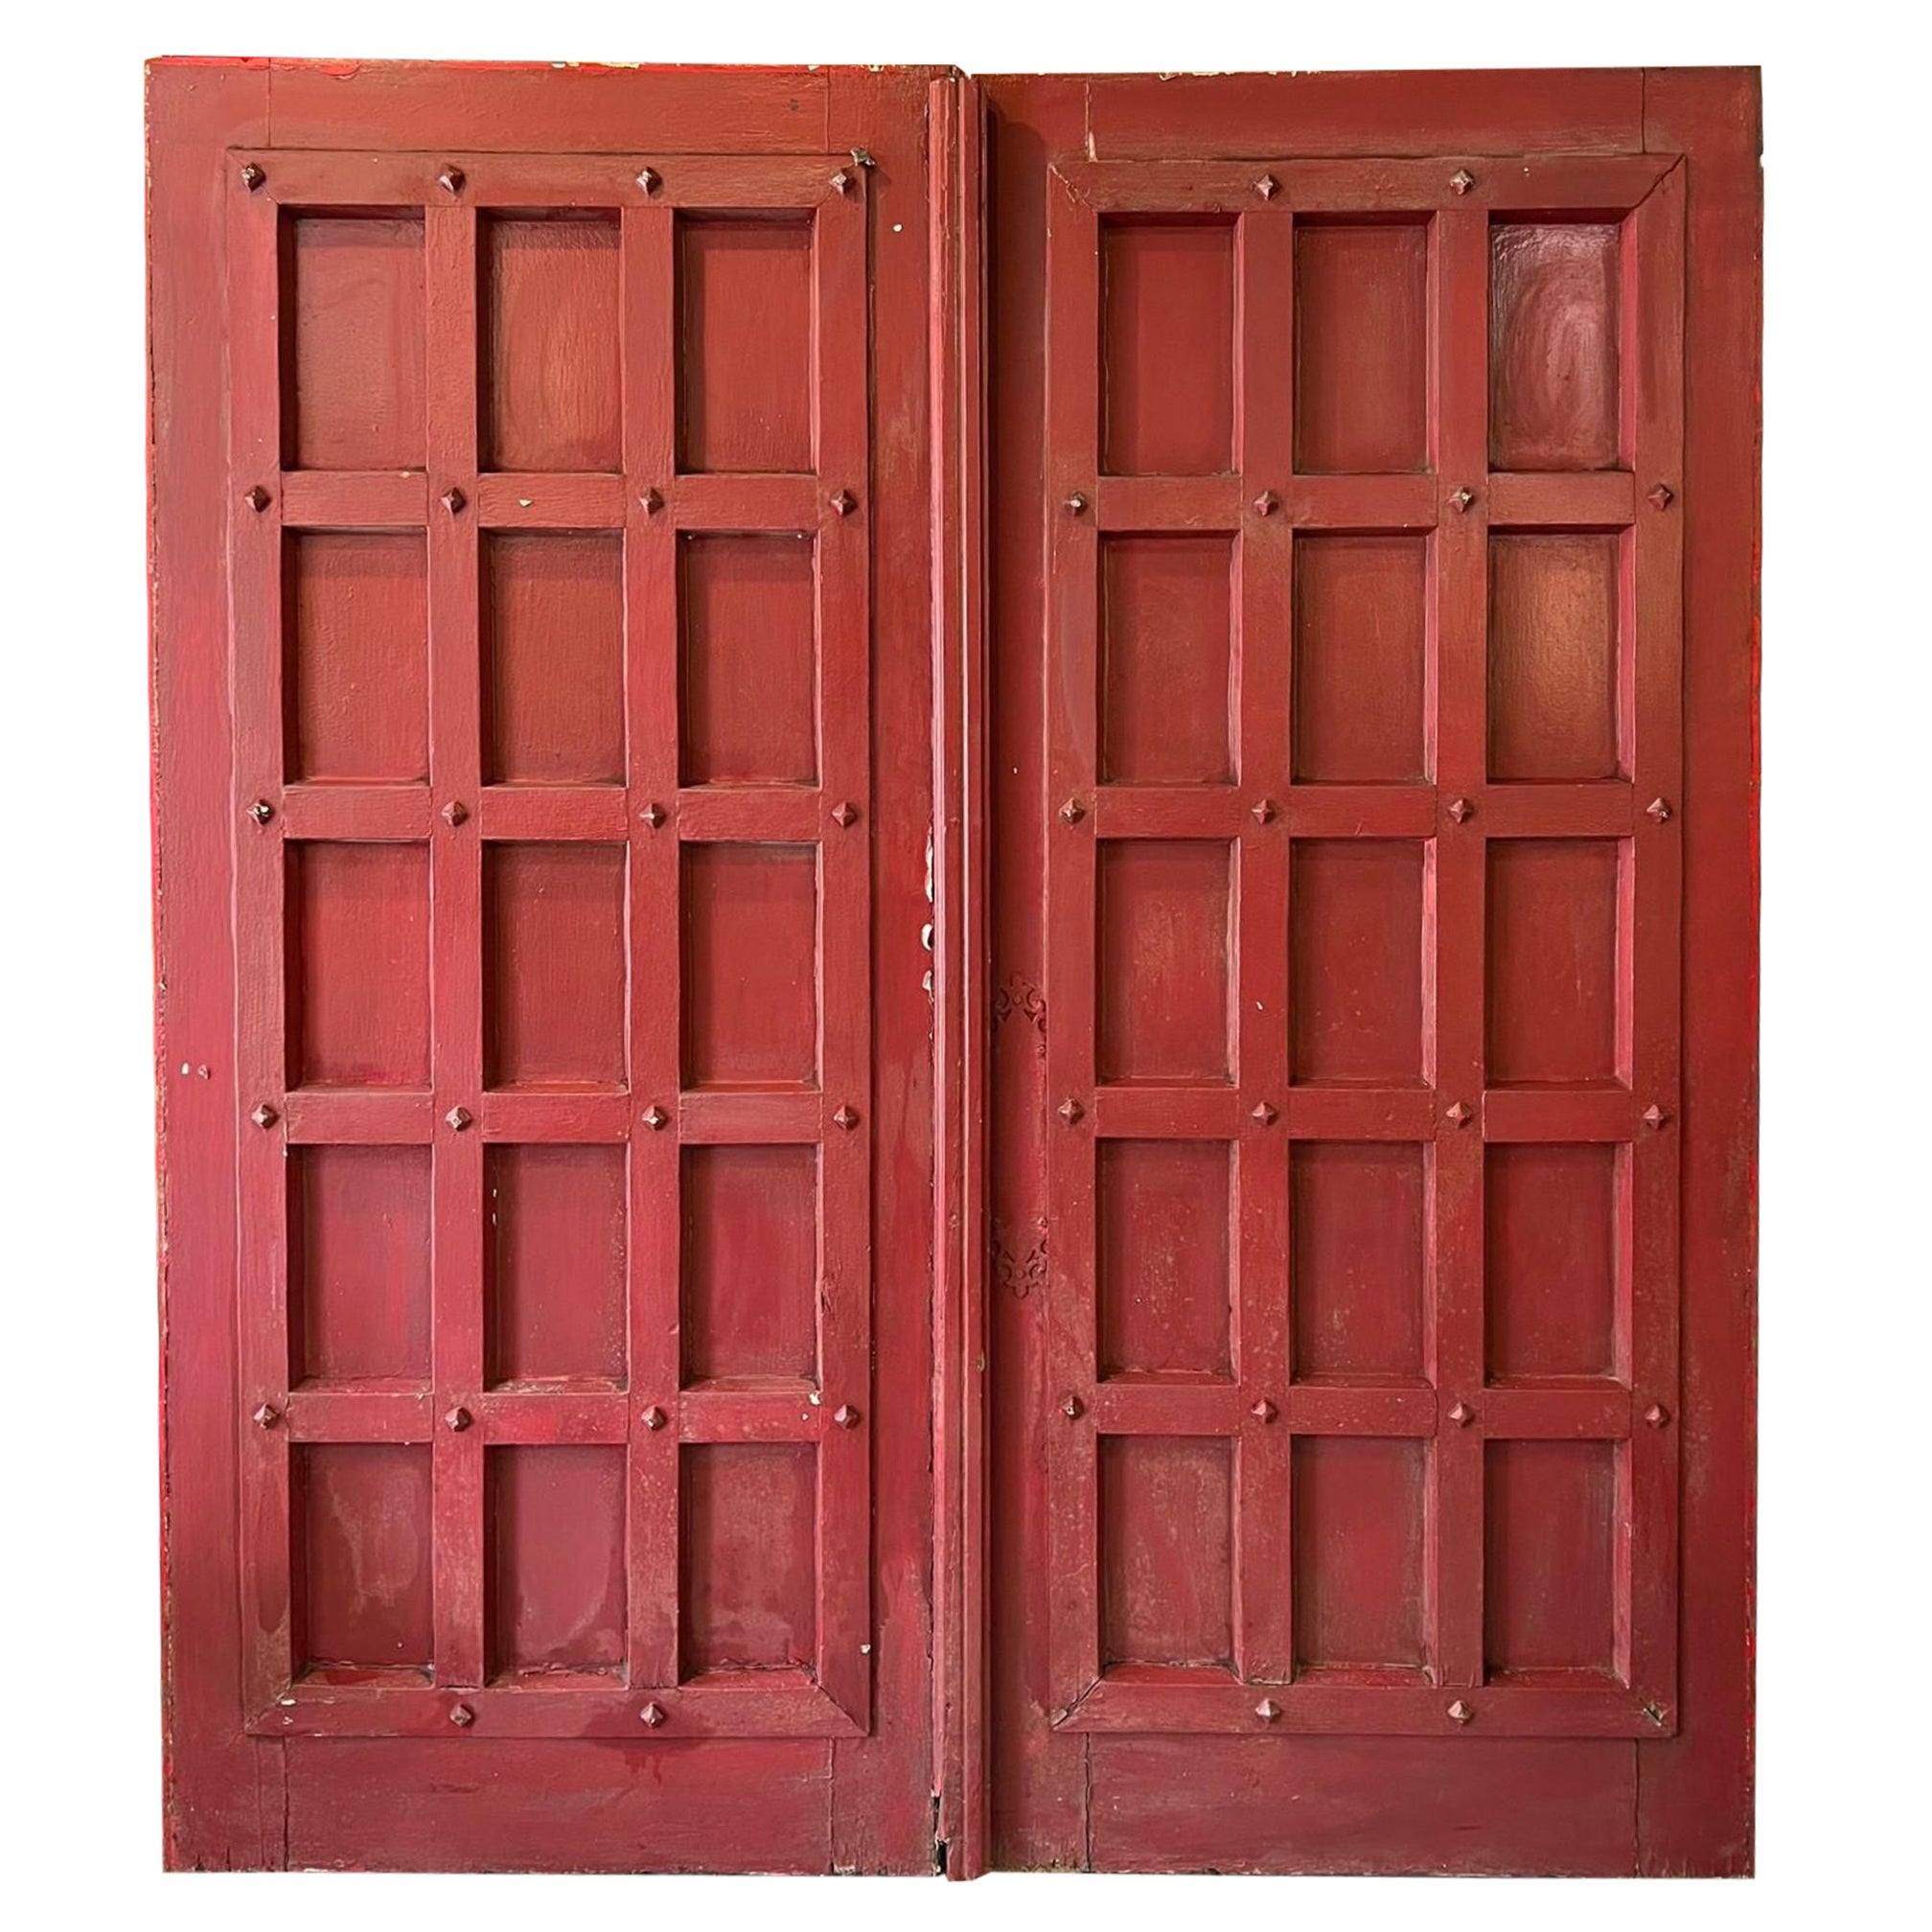 Early 20th Century Pair of Antique Wooden Doors with Panels